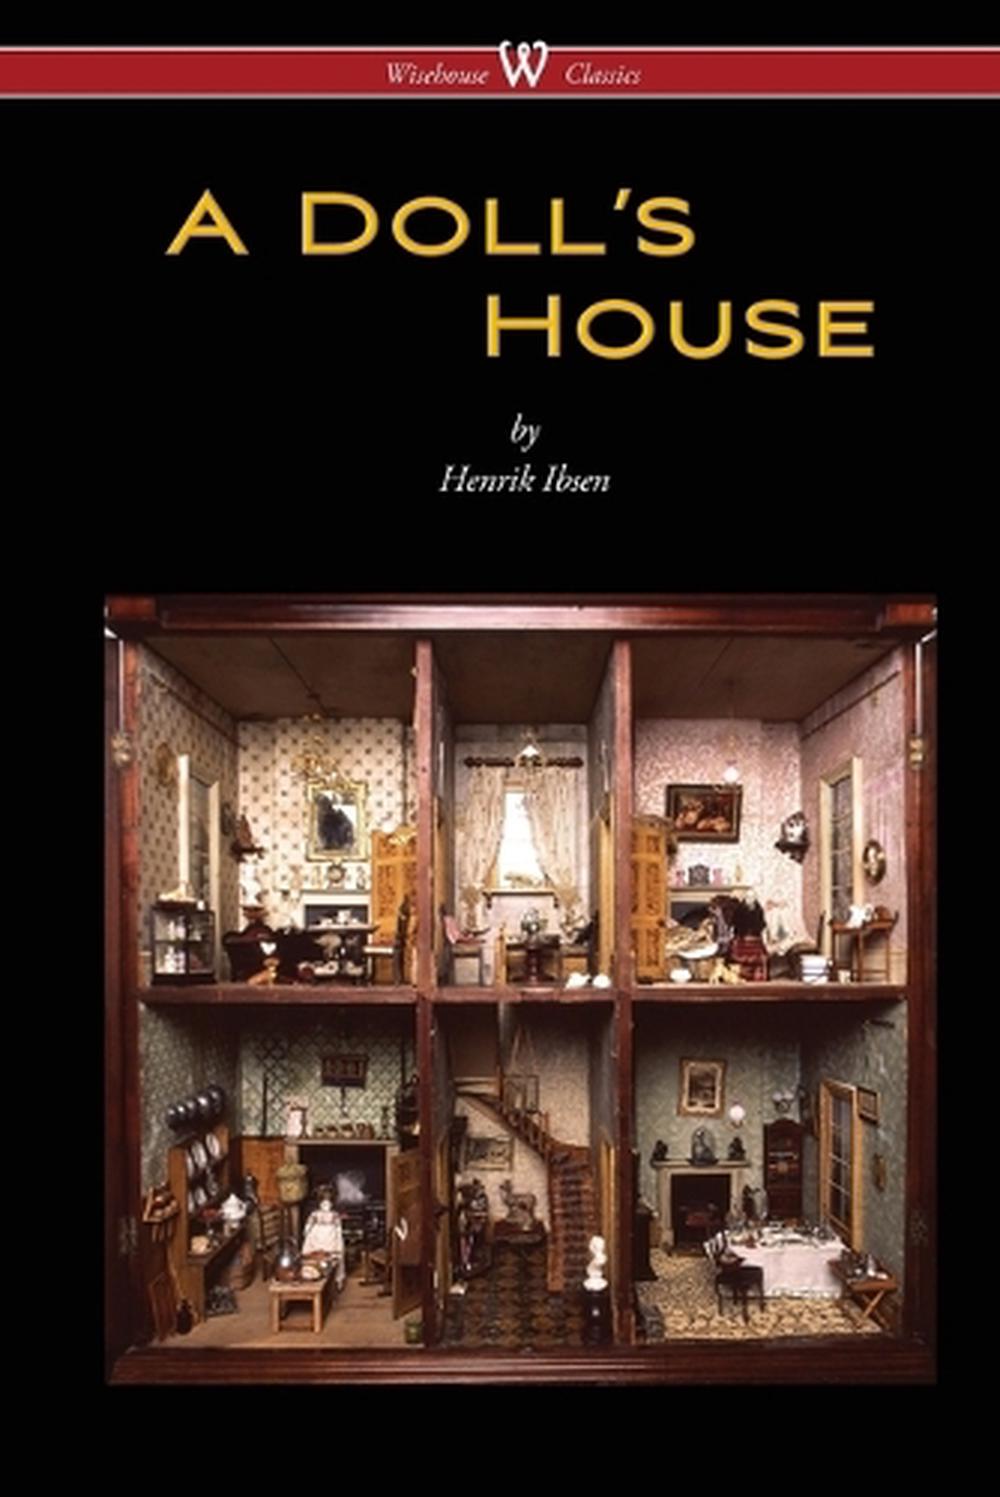 research paper on a doll's house